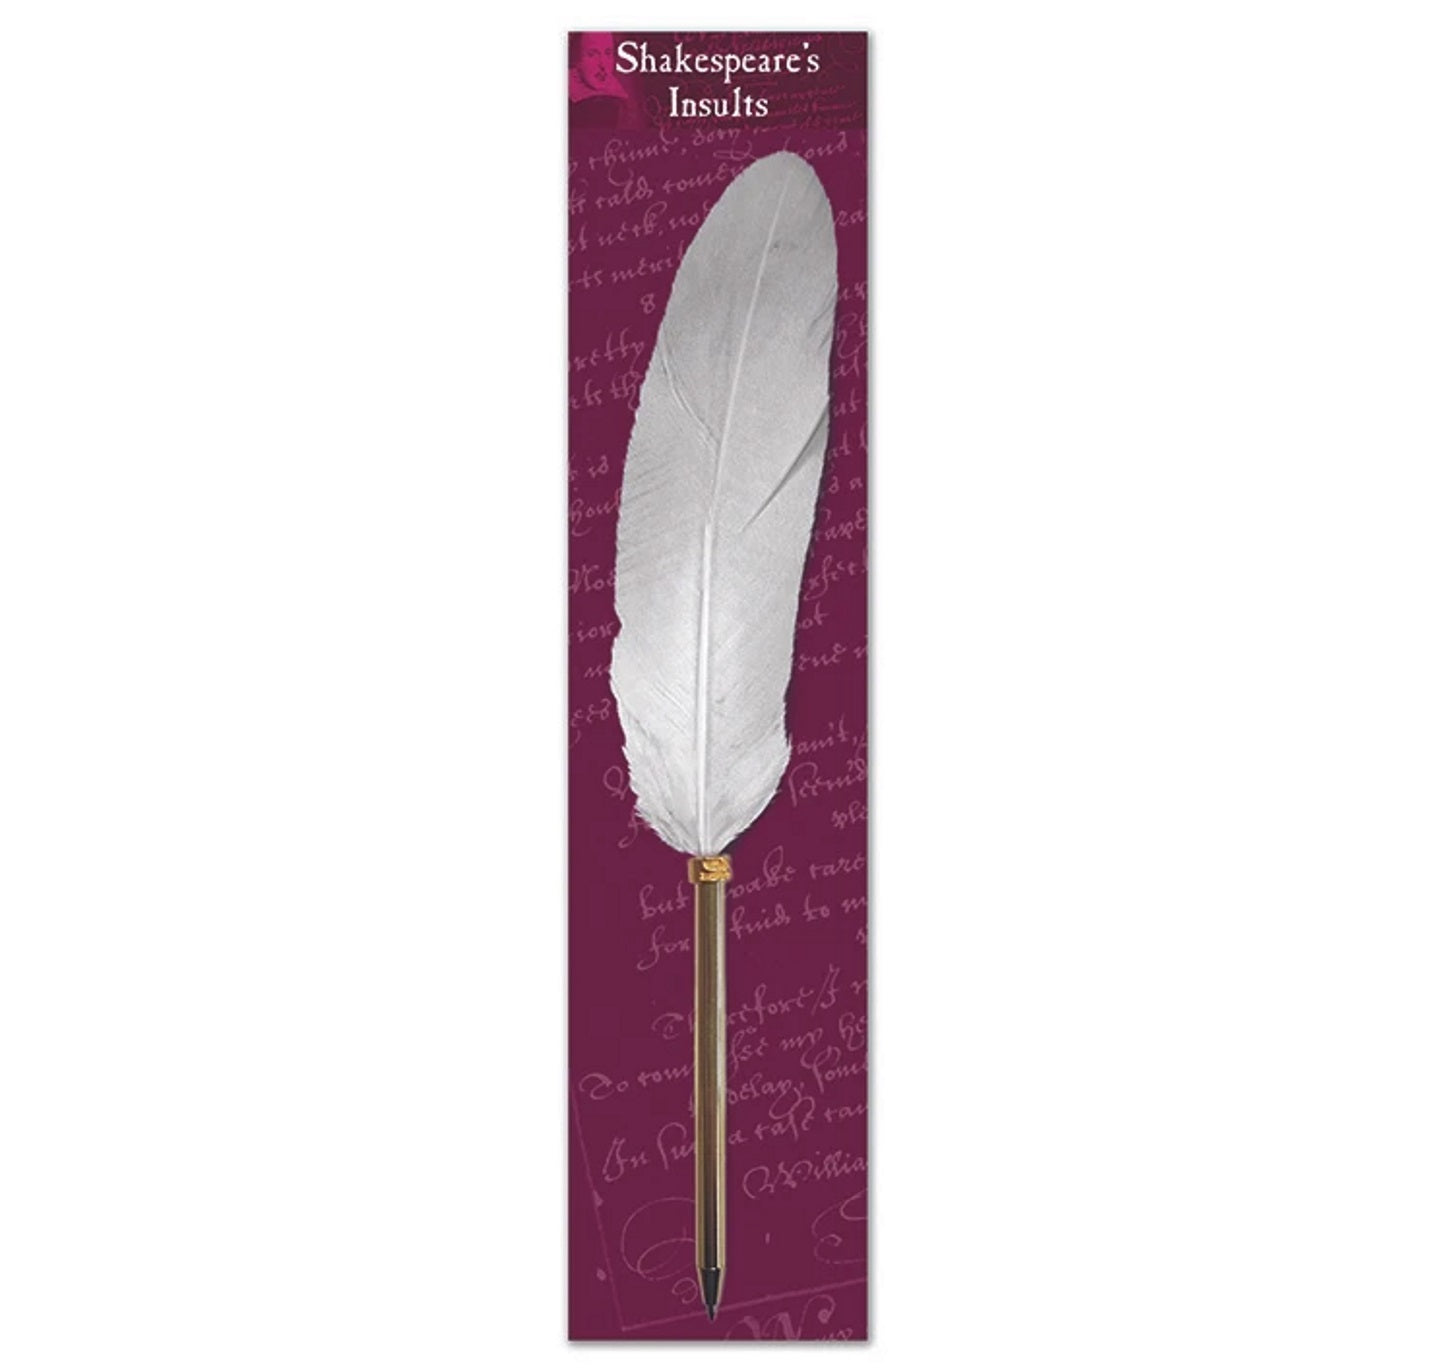 Feather Pen - Shakespeare's Insults – The RSC shop